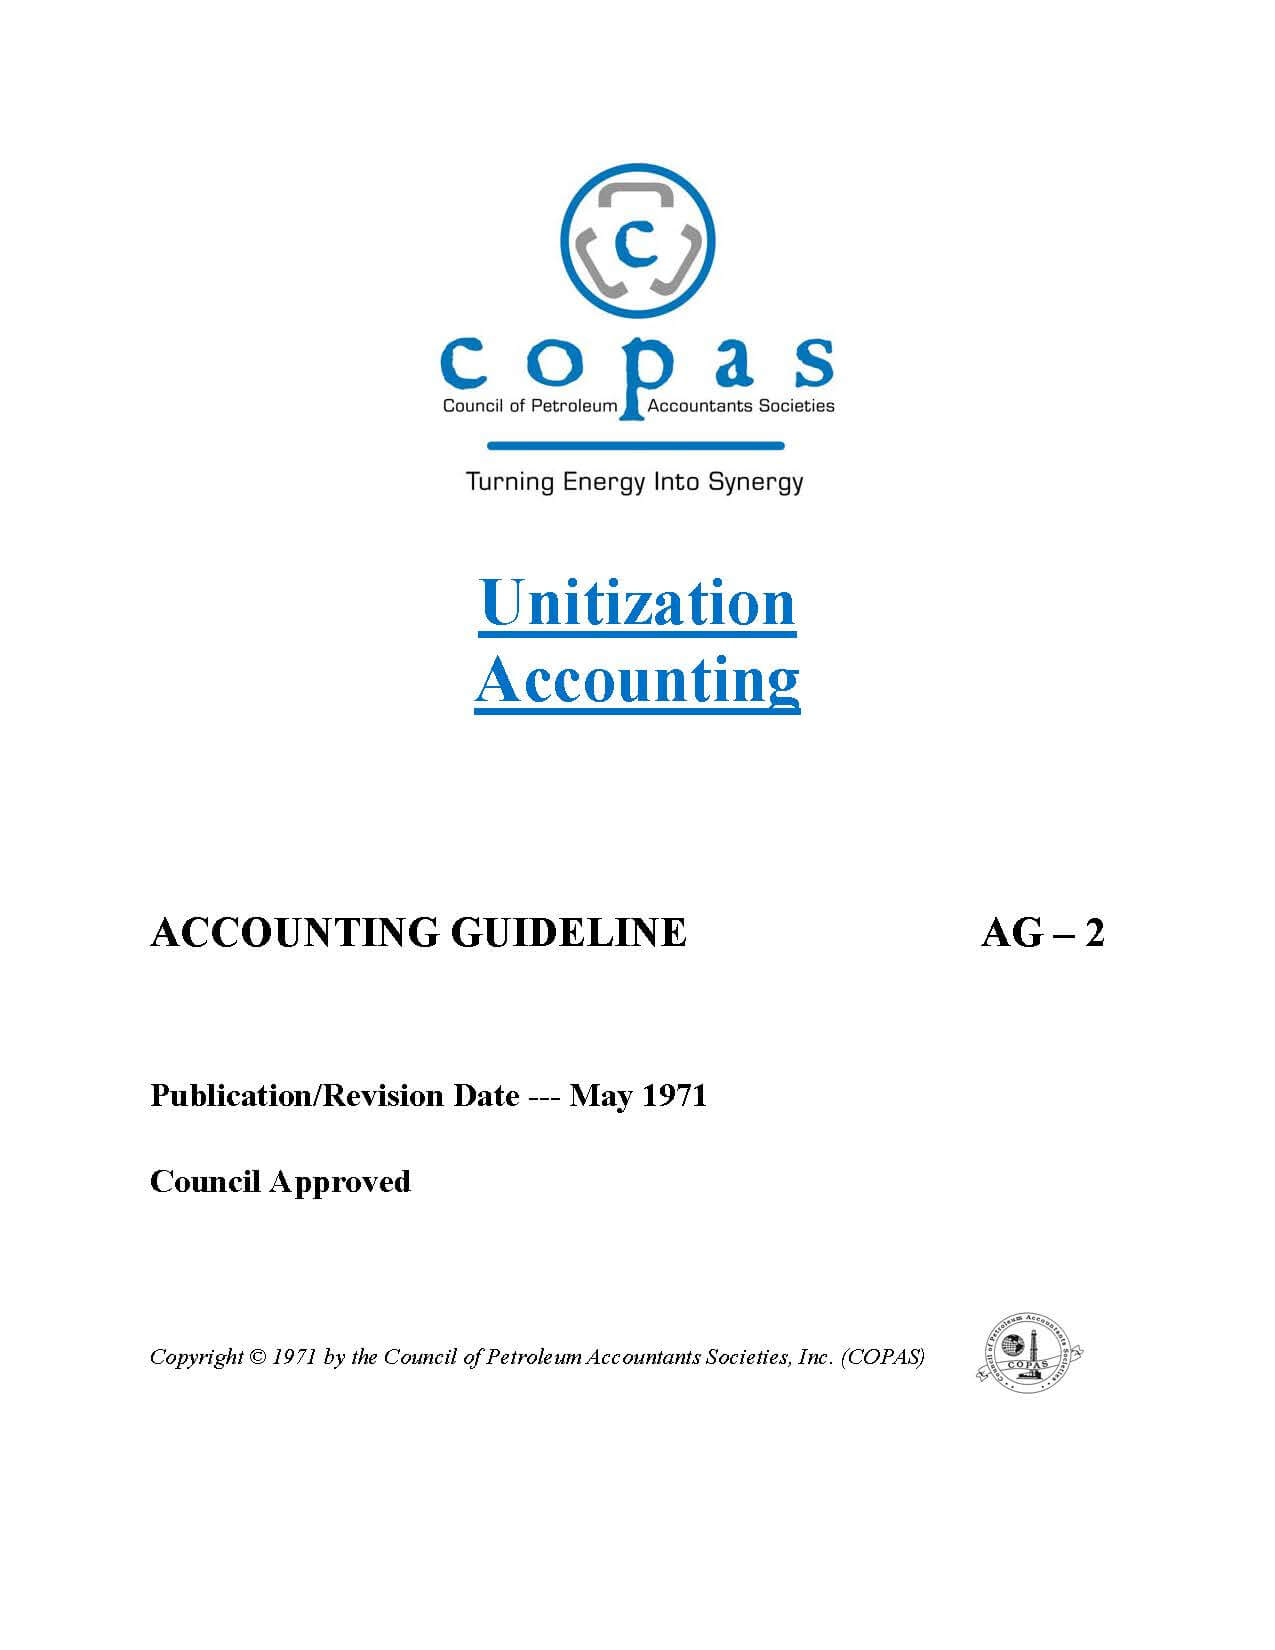 AG-2 Unitization Accounting - products AG 2 Unitization Accounting - Council of Petroleum Accountants Societies